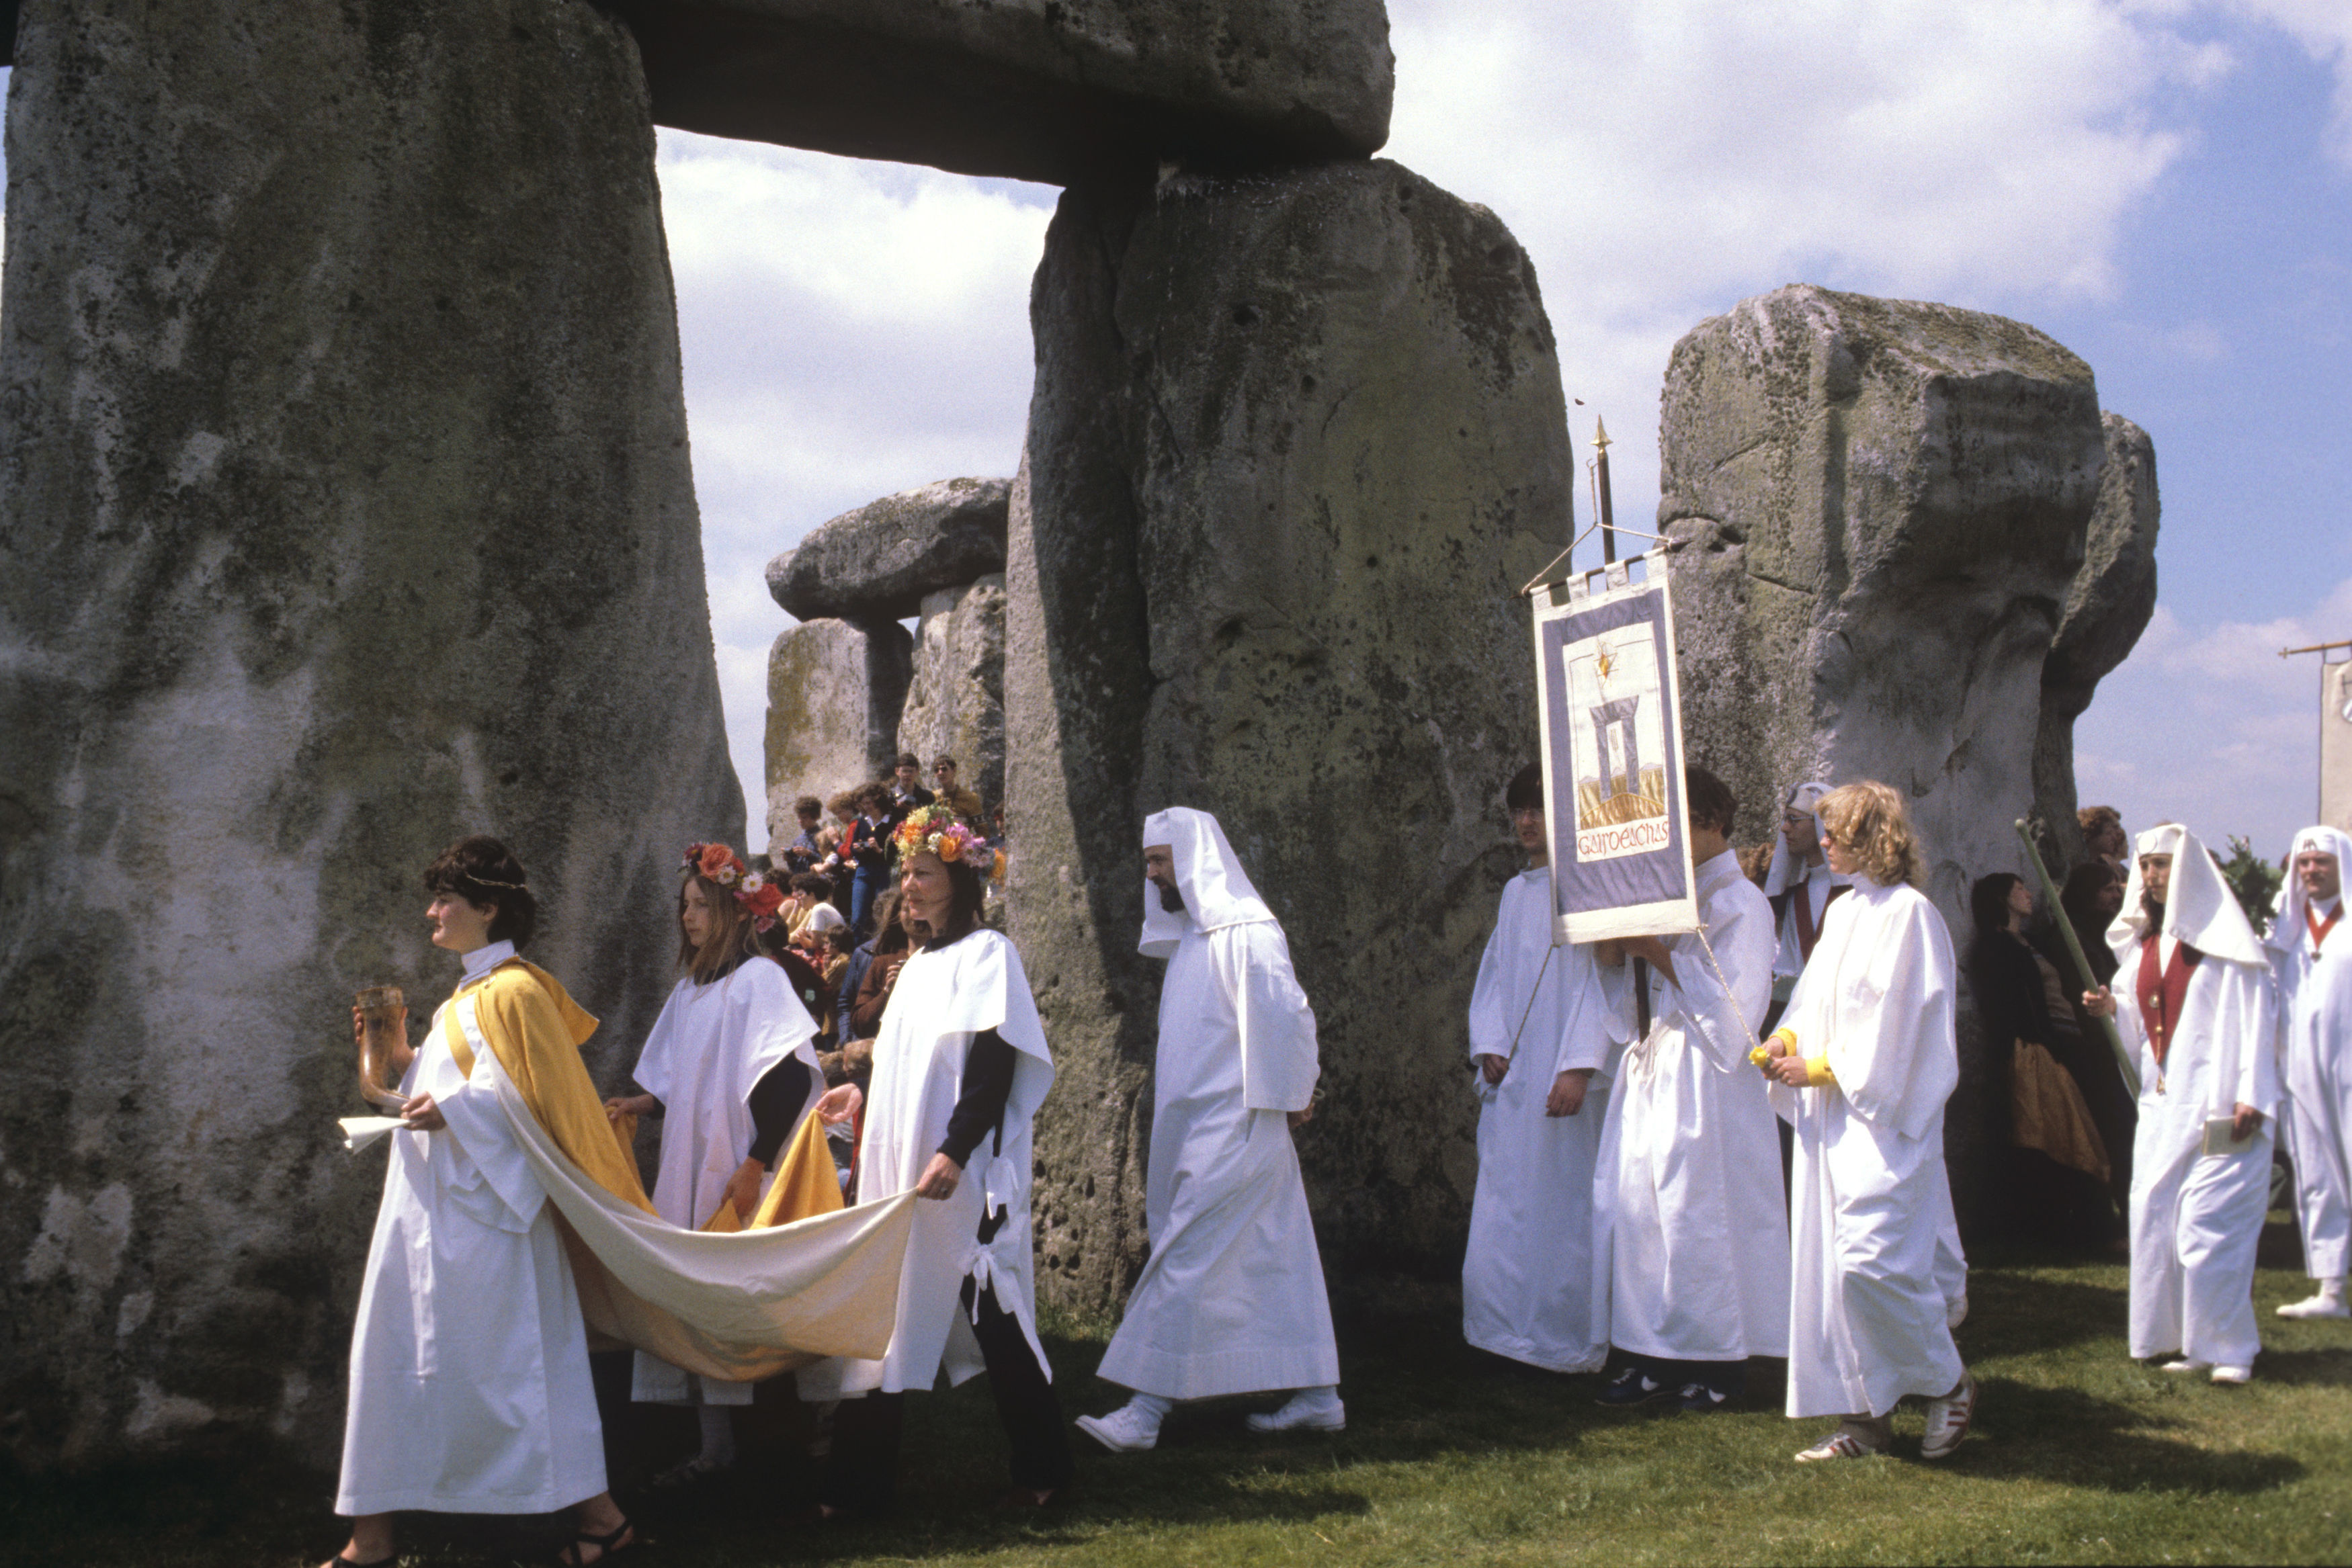 People wearing white robes during a procession in 1981 celebrating the Midsummer Solstice at Stonehenge 